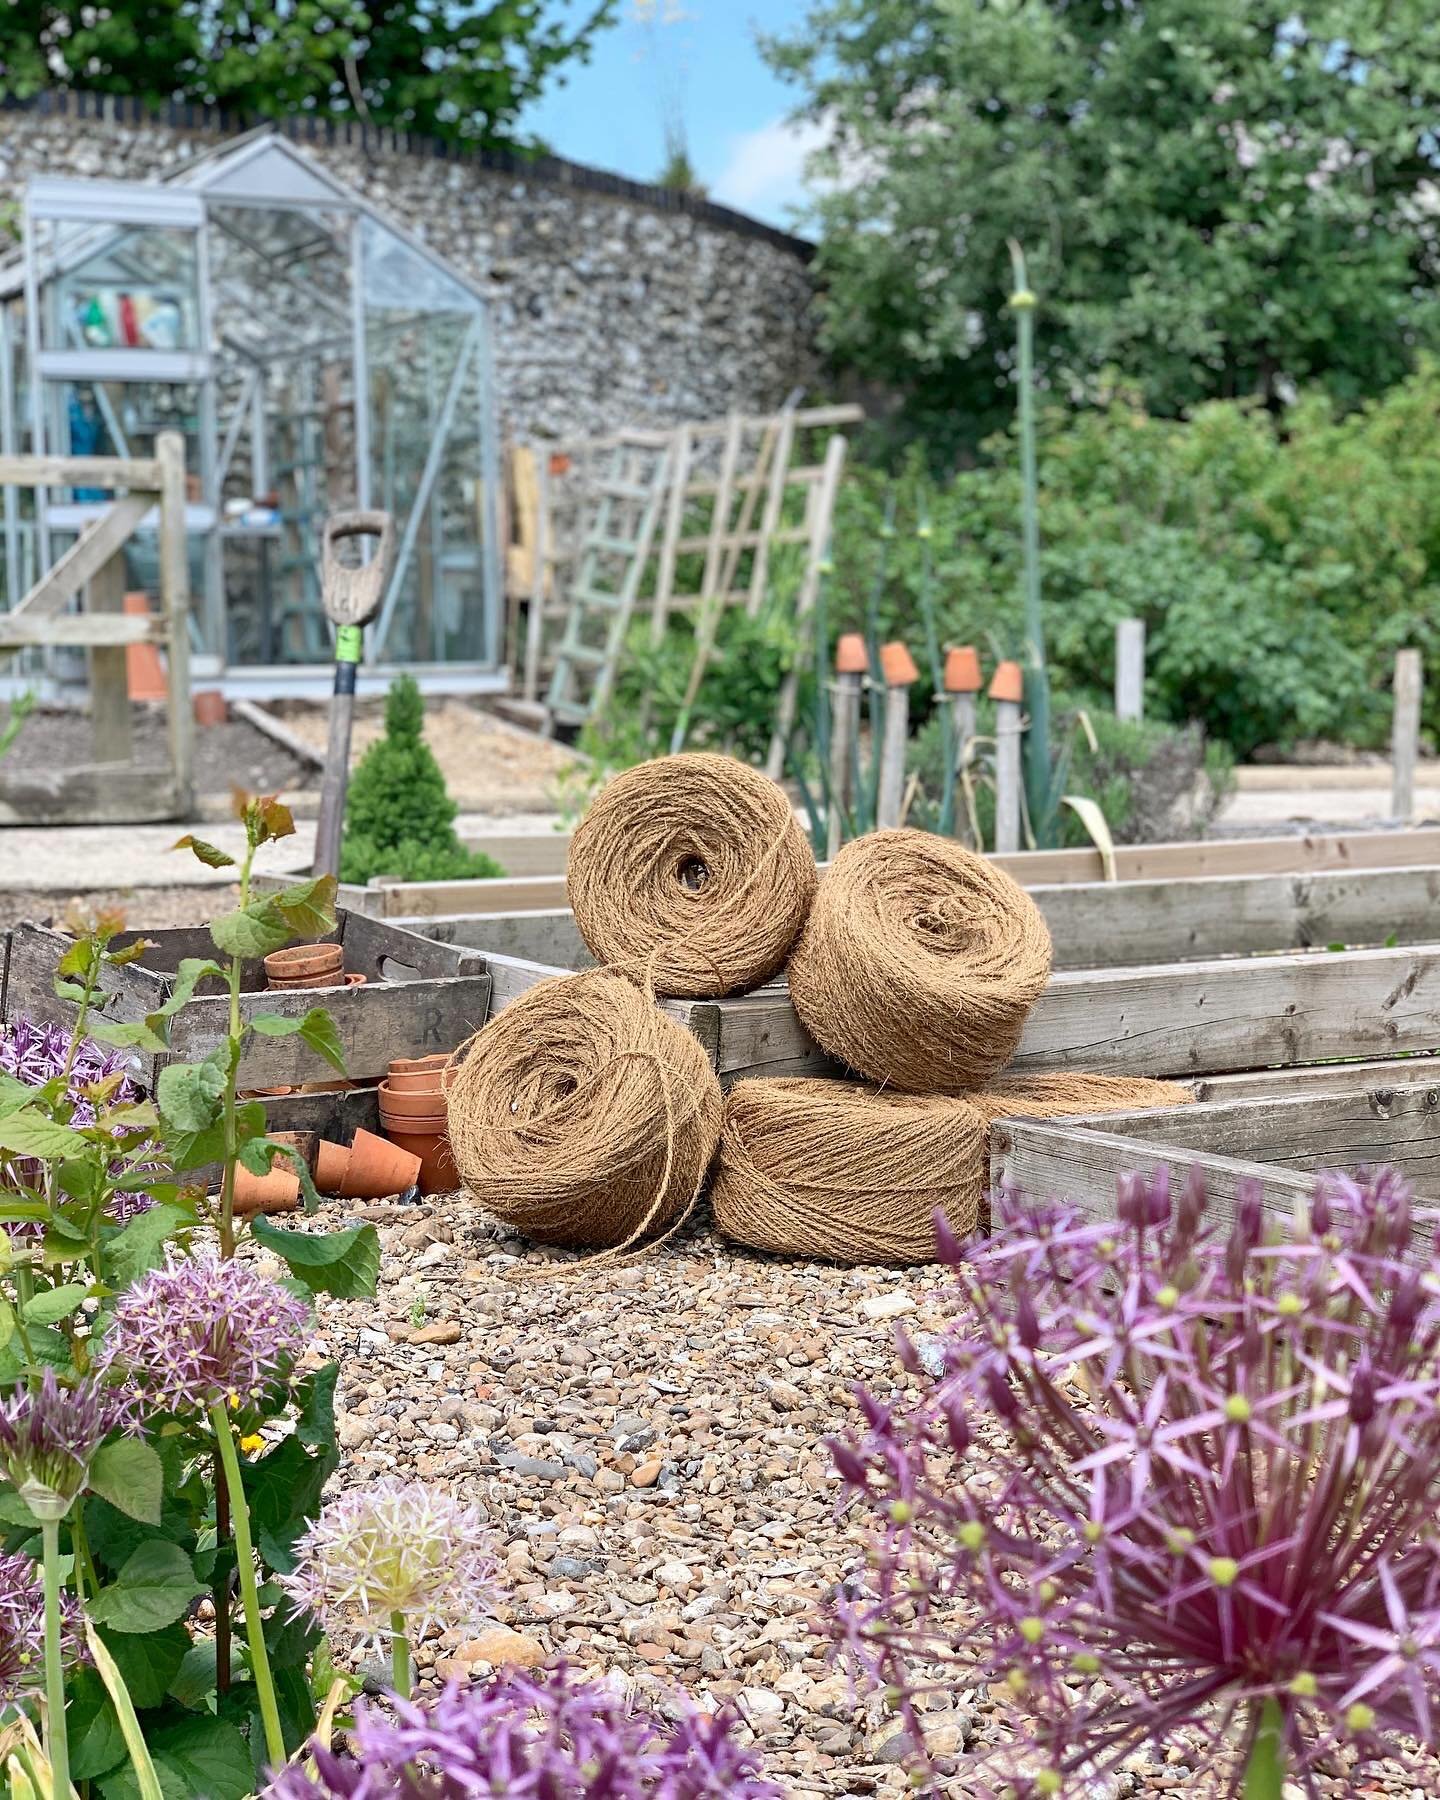 GARDEN TWINE 🌱 || A garden essential! Growing your own vegetables and plants in the garden this year? This is one of the must-haves... strong, multipurpose Garden Twine / String! 

This is the super strong string we use to train our Hops in the Hop 